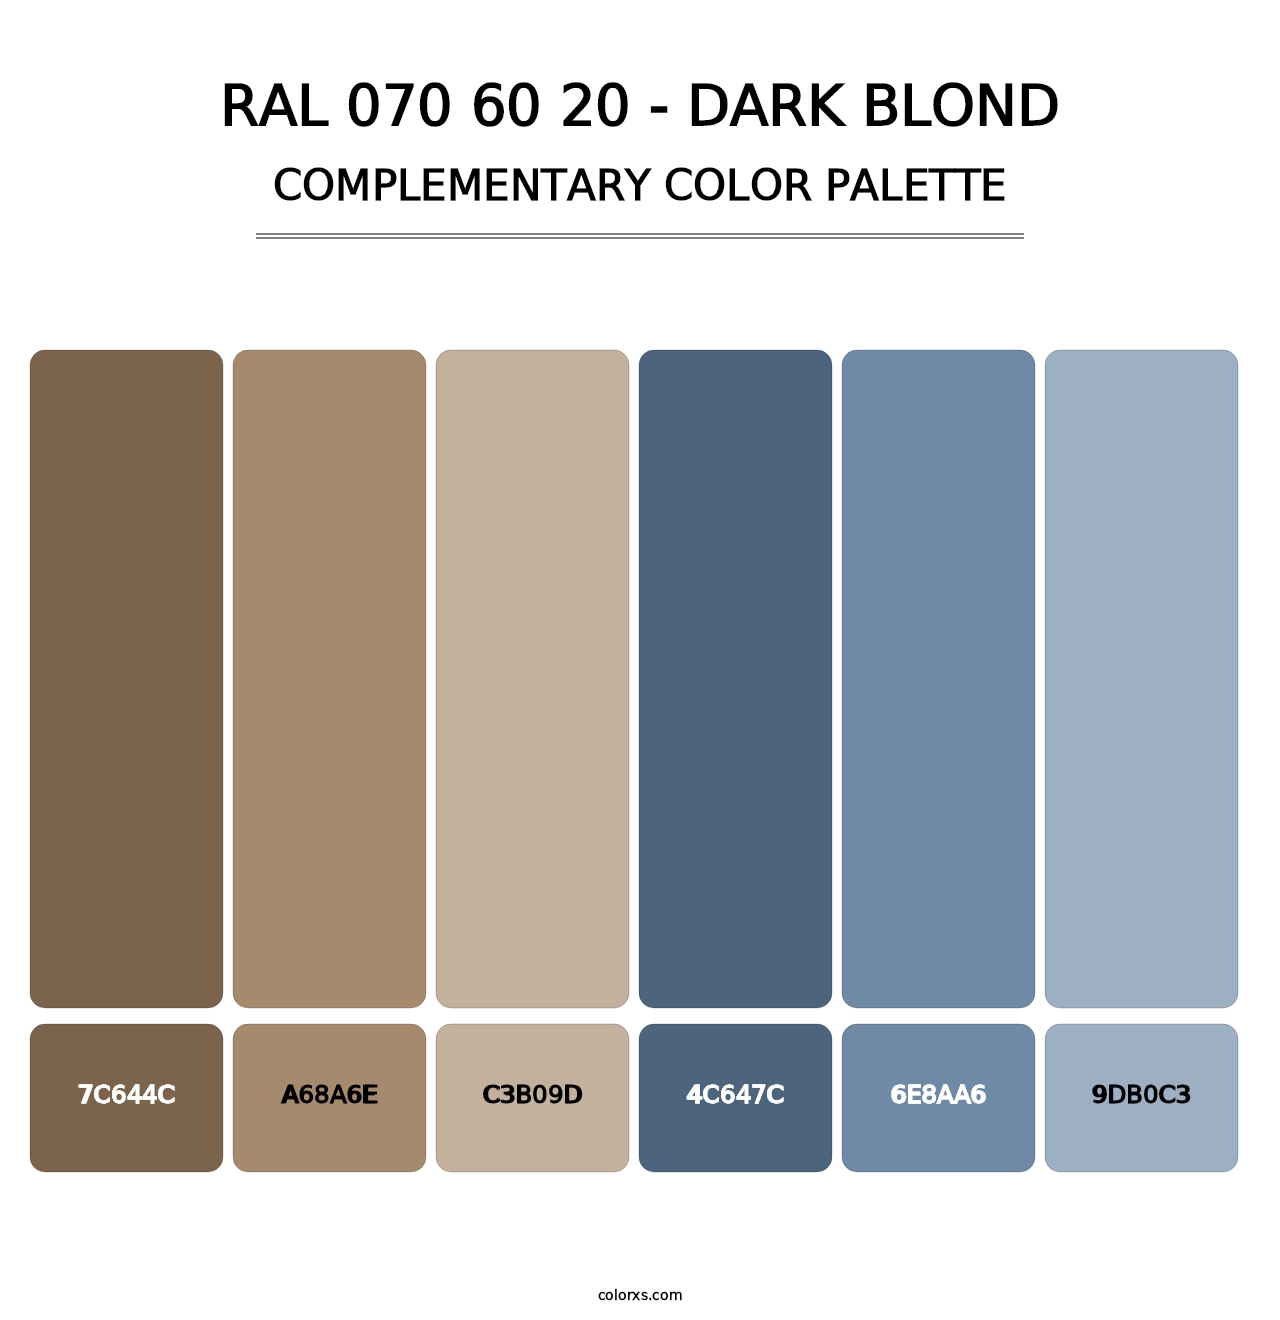 RAL 070 60 20 - Dark Blond - Complementary Color Palette